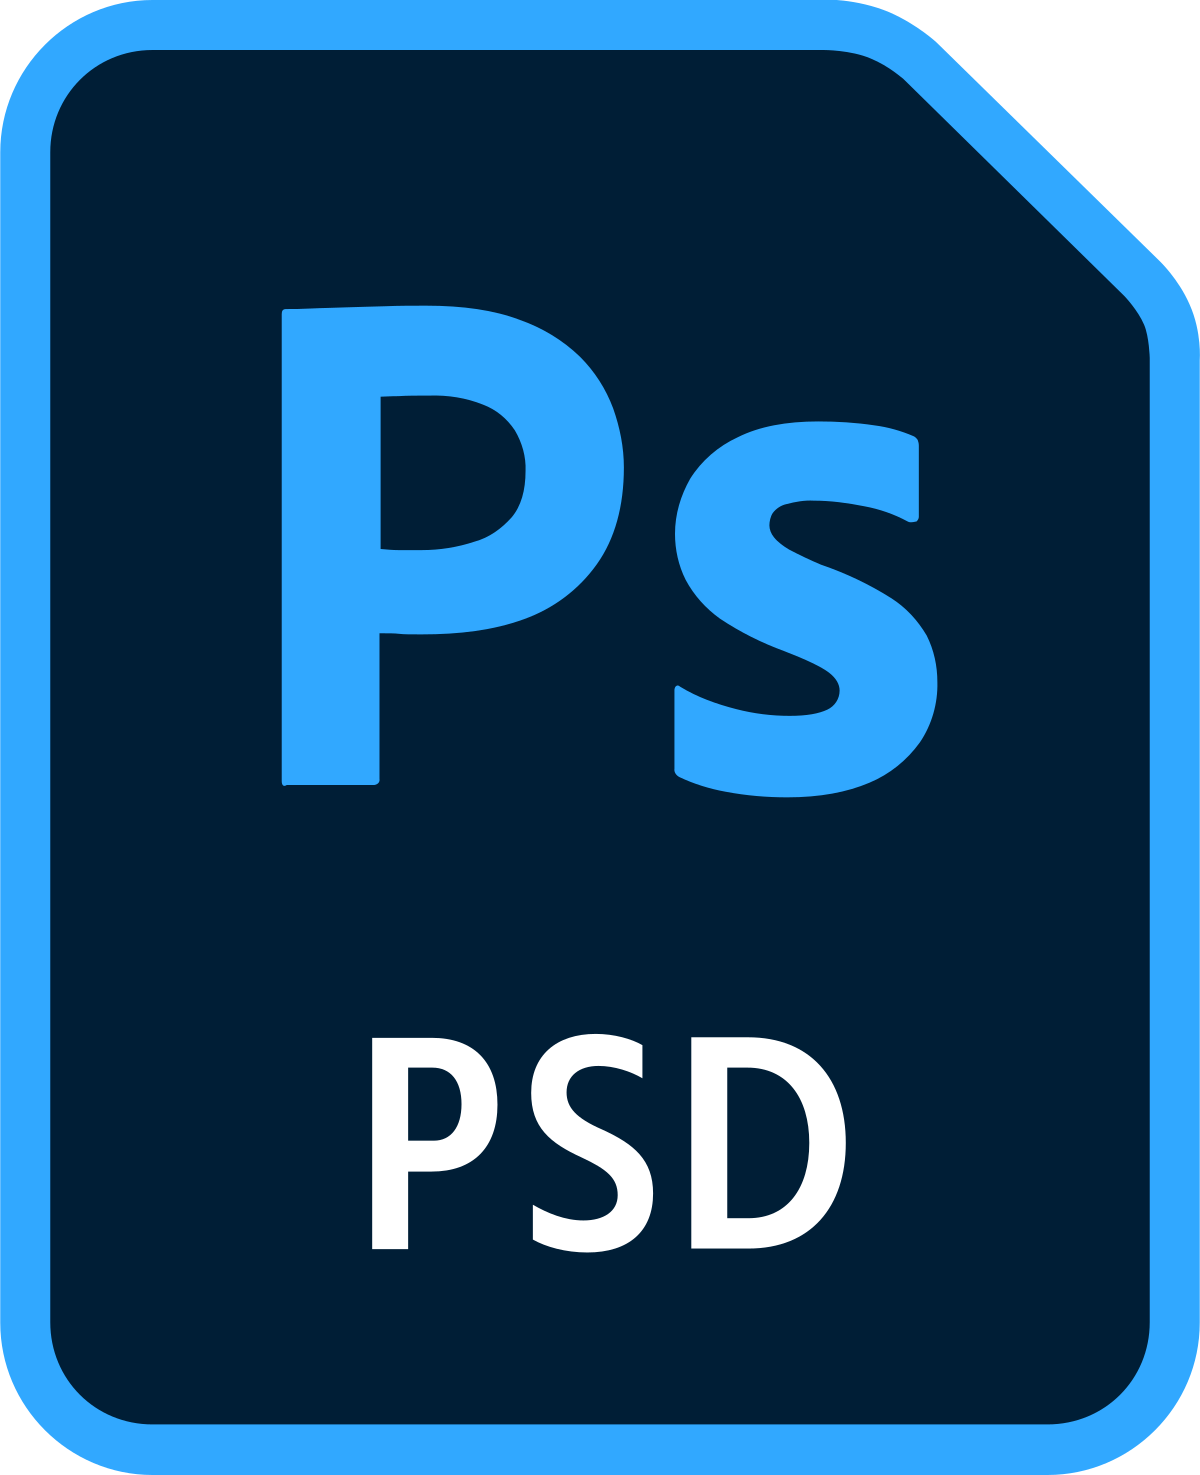 PSD File Extension